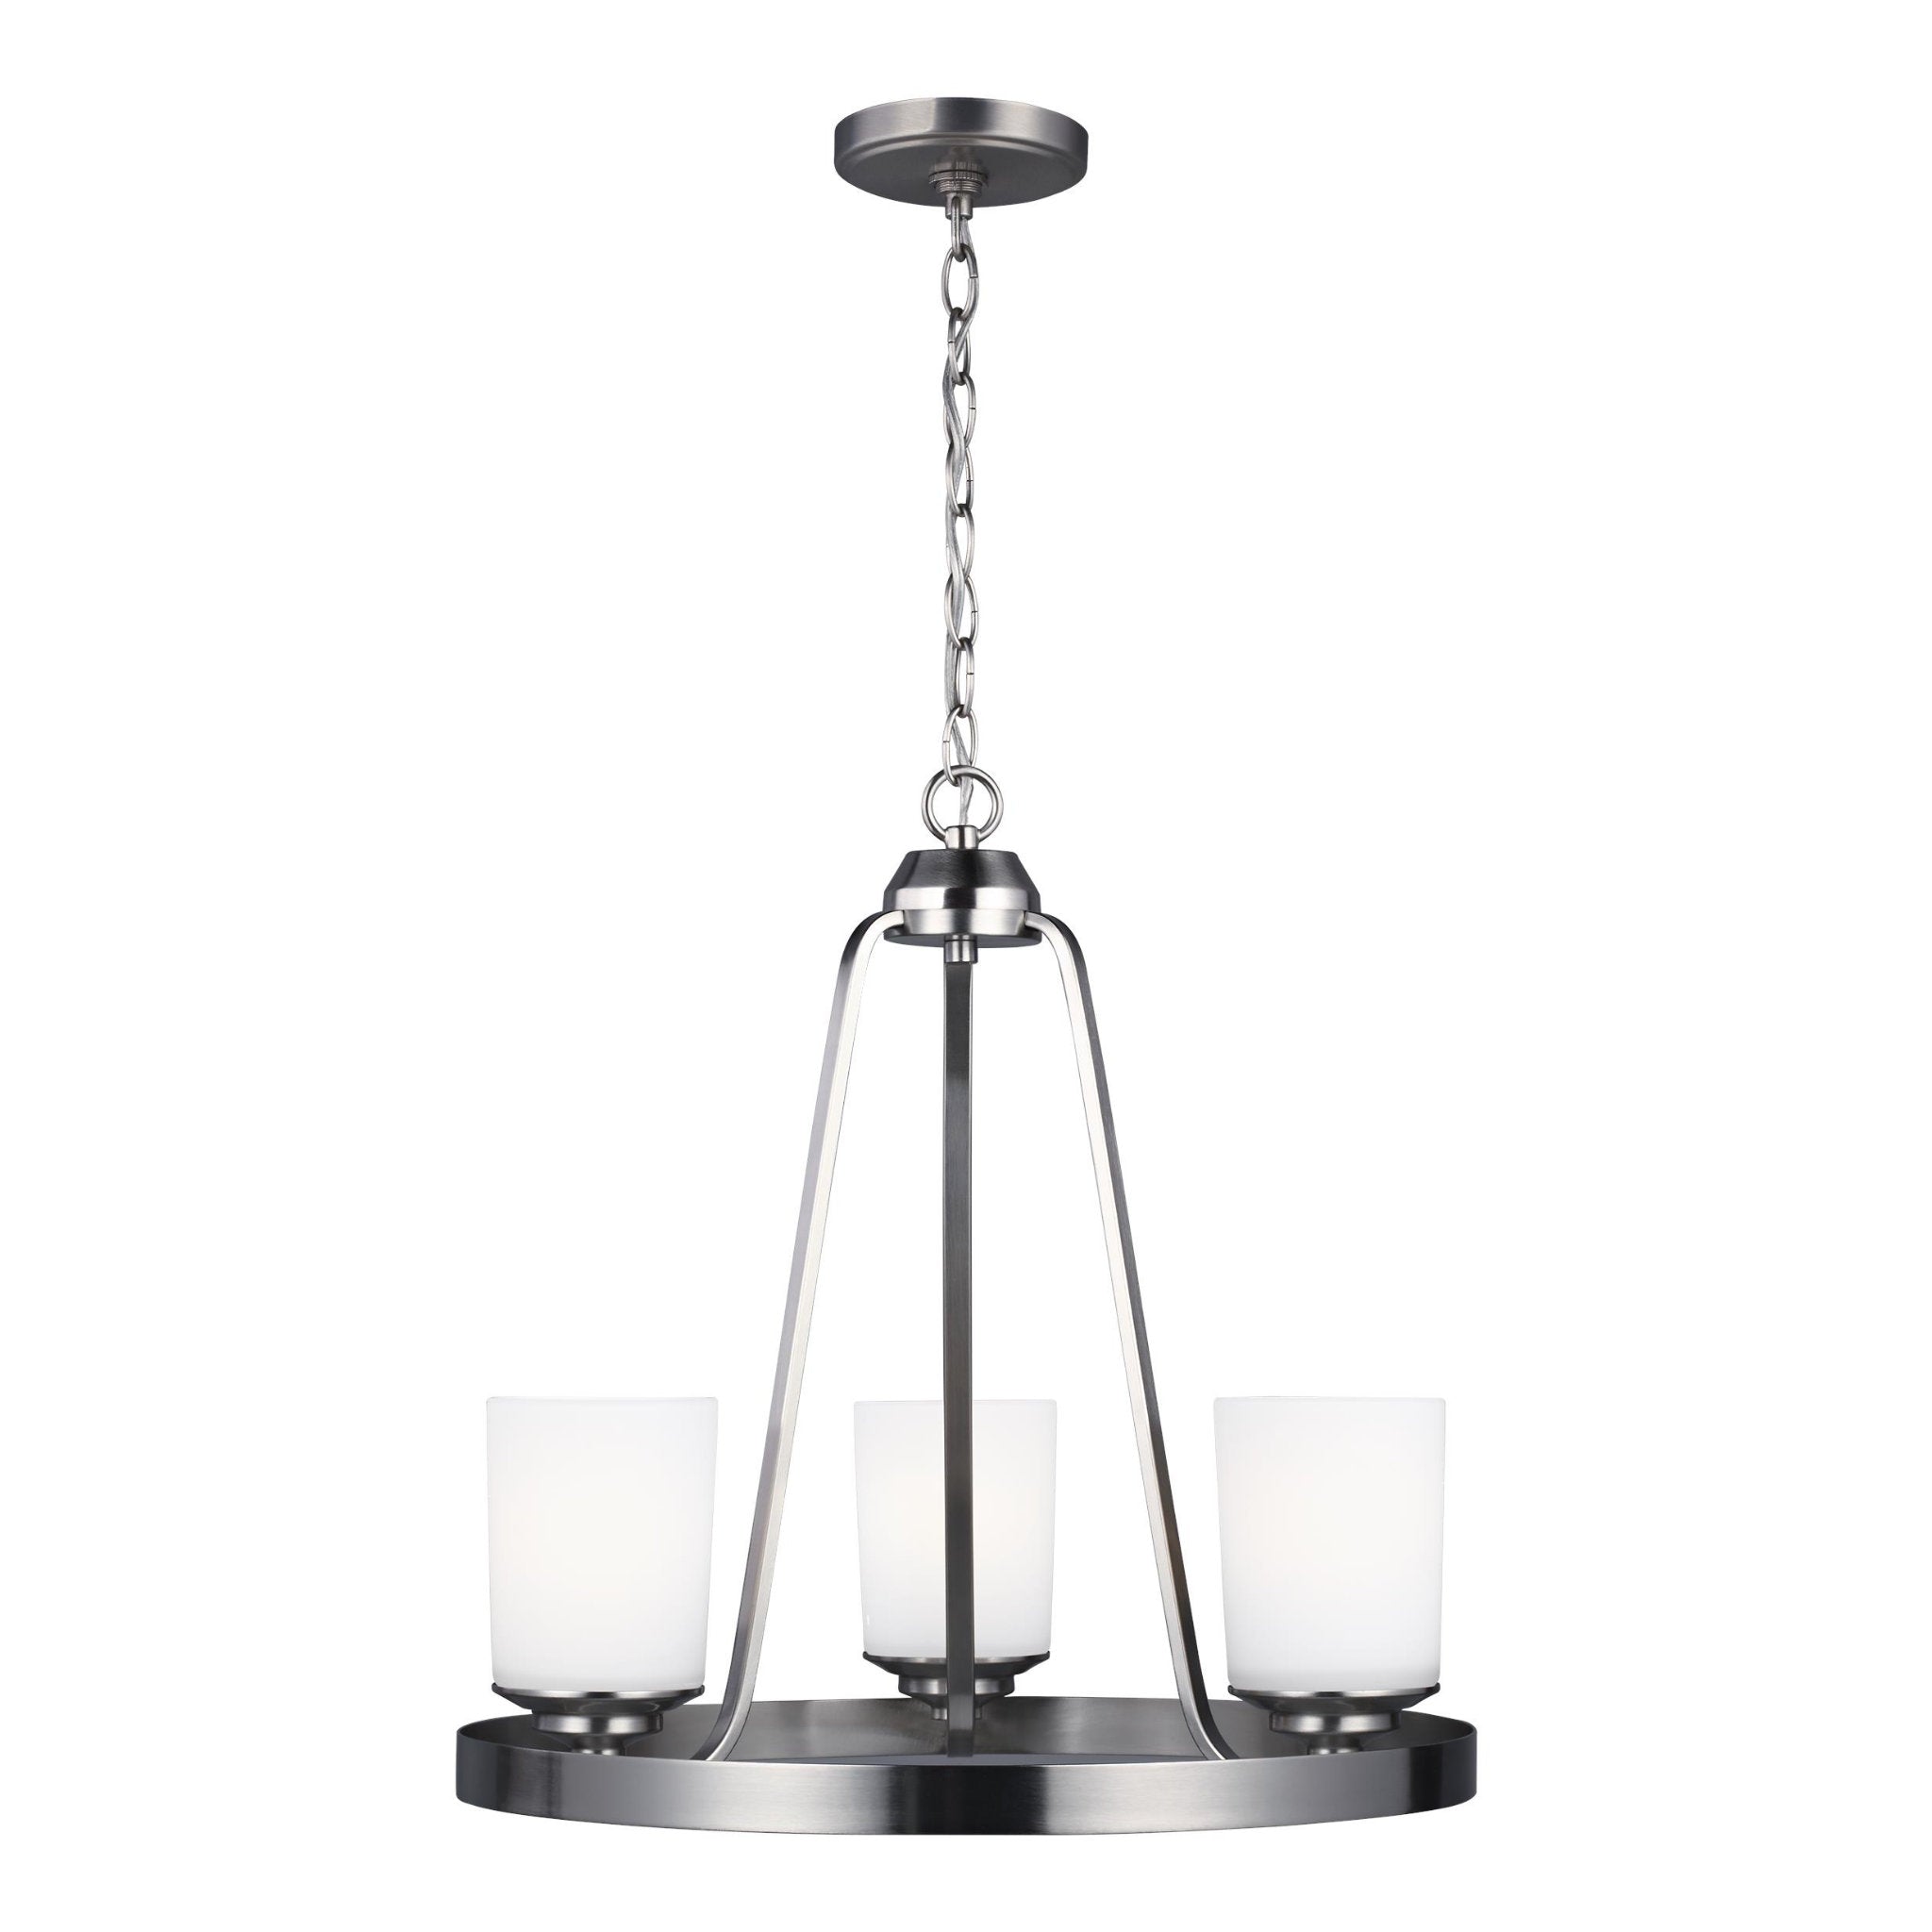 Kemal Three Light Chandelier Transitional 19" Height Steel Round Etched / White Inside Shade in Brushed Nickel